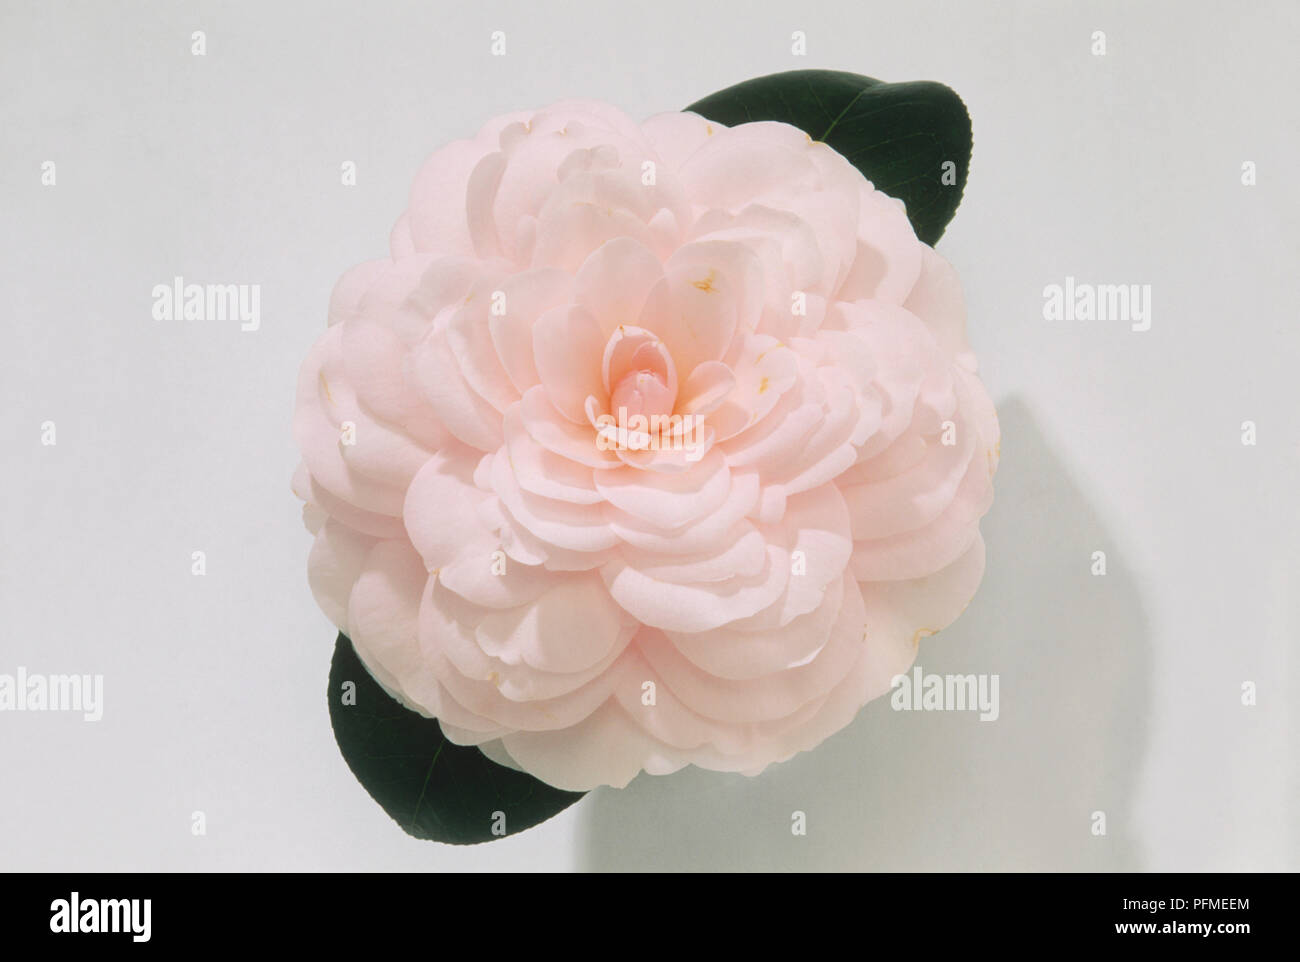 Camellia japonica 'Helen's Ballerina', flower with pink petals, and dark green leaves Stock Photo